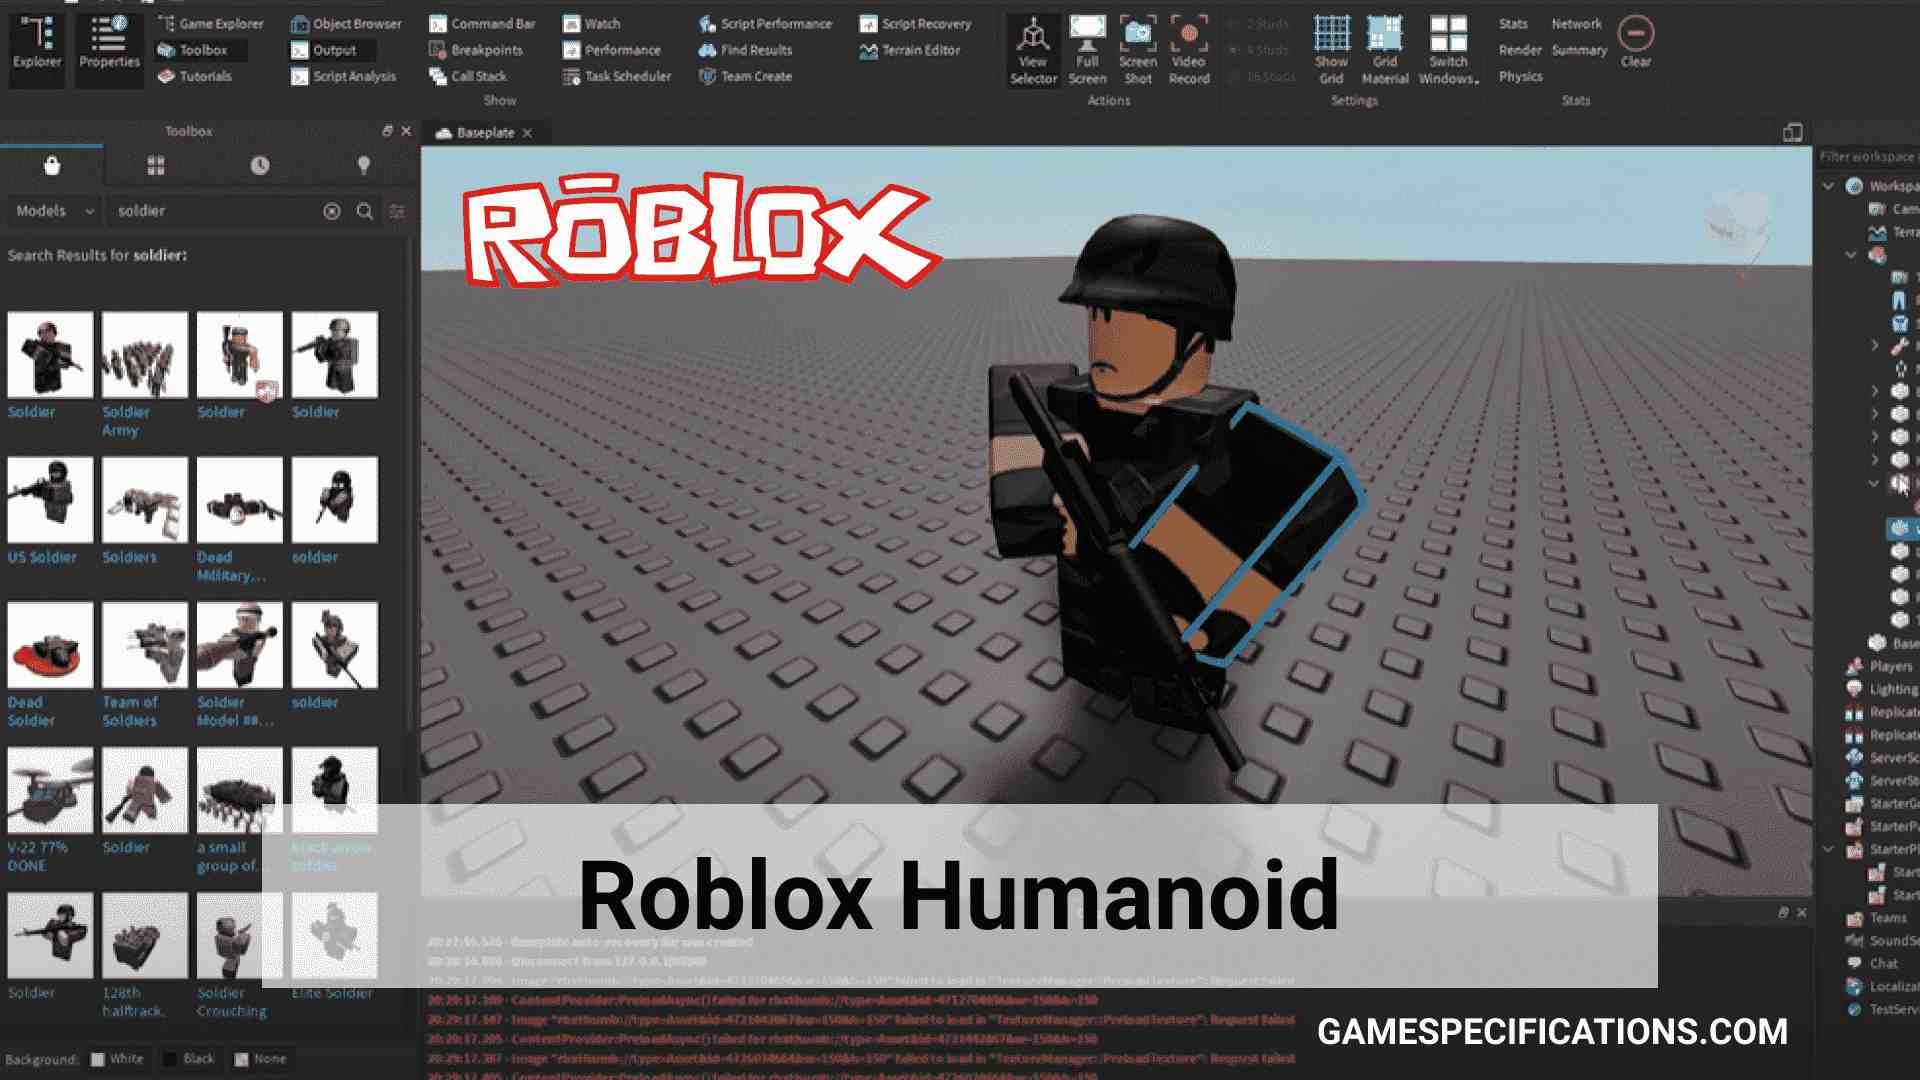 Roblox Humanoid Complete Guide On Humanoid Coding 2021 Game Specifications - roblox camera toggle